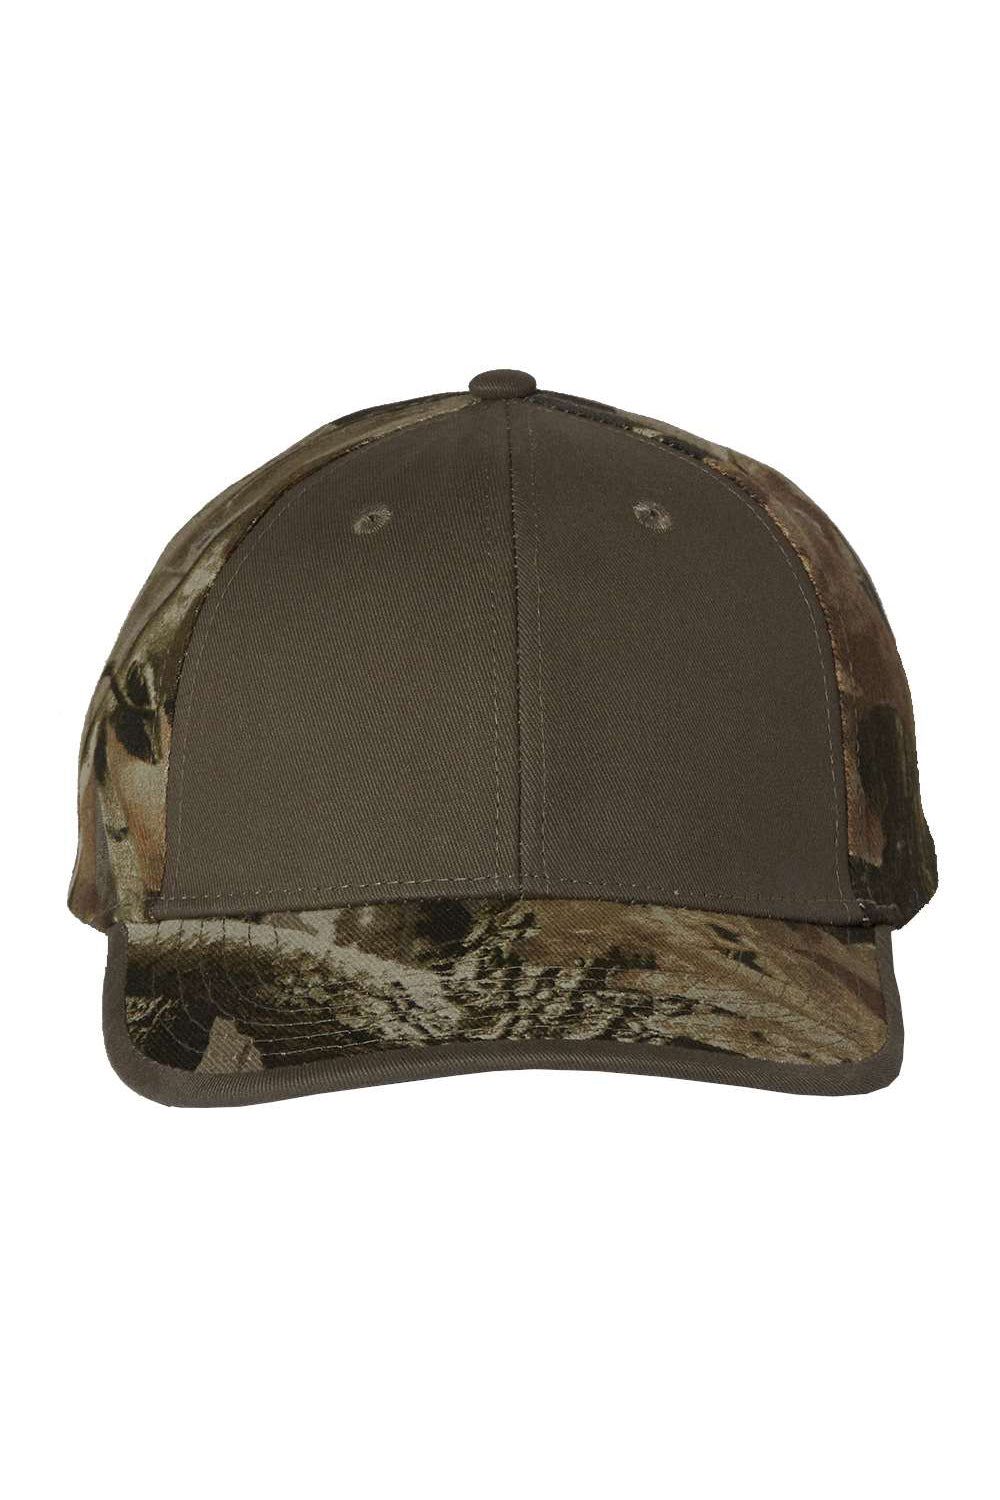 Kati LC102 Mens Solid Front Camo Back Hat Olive Green/Hardwoods Flat Front